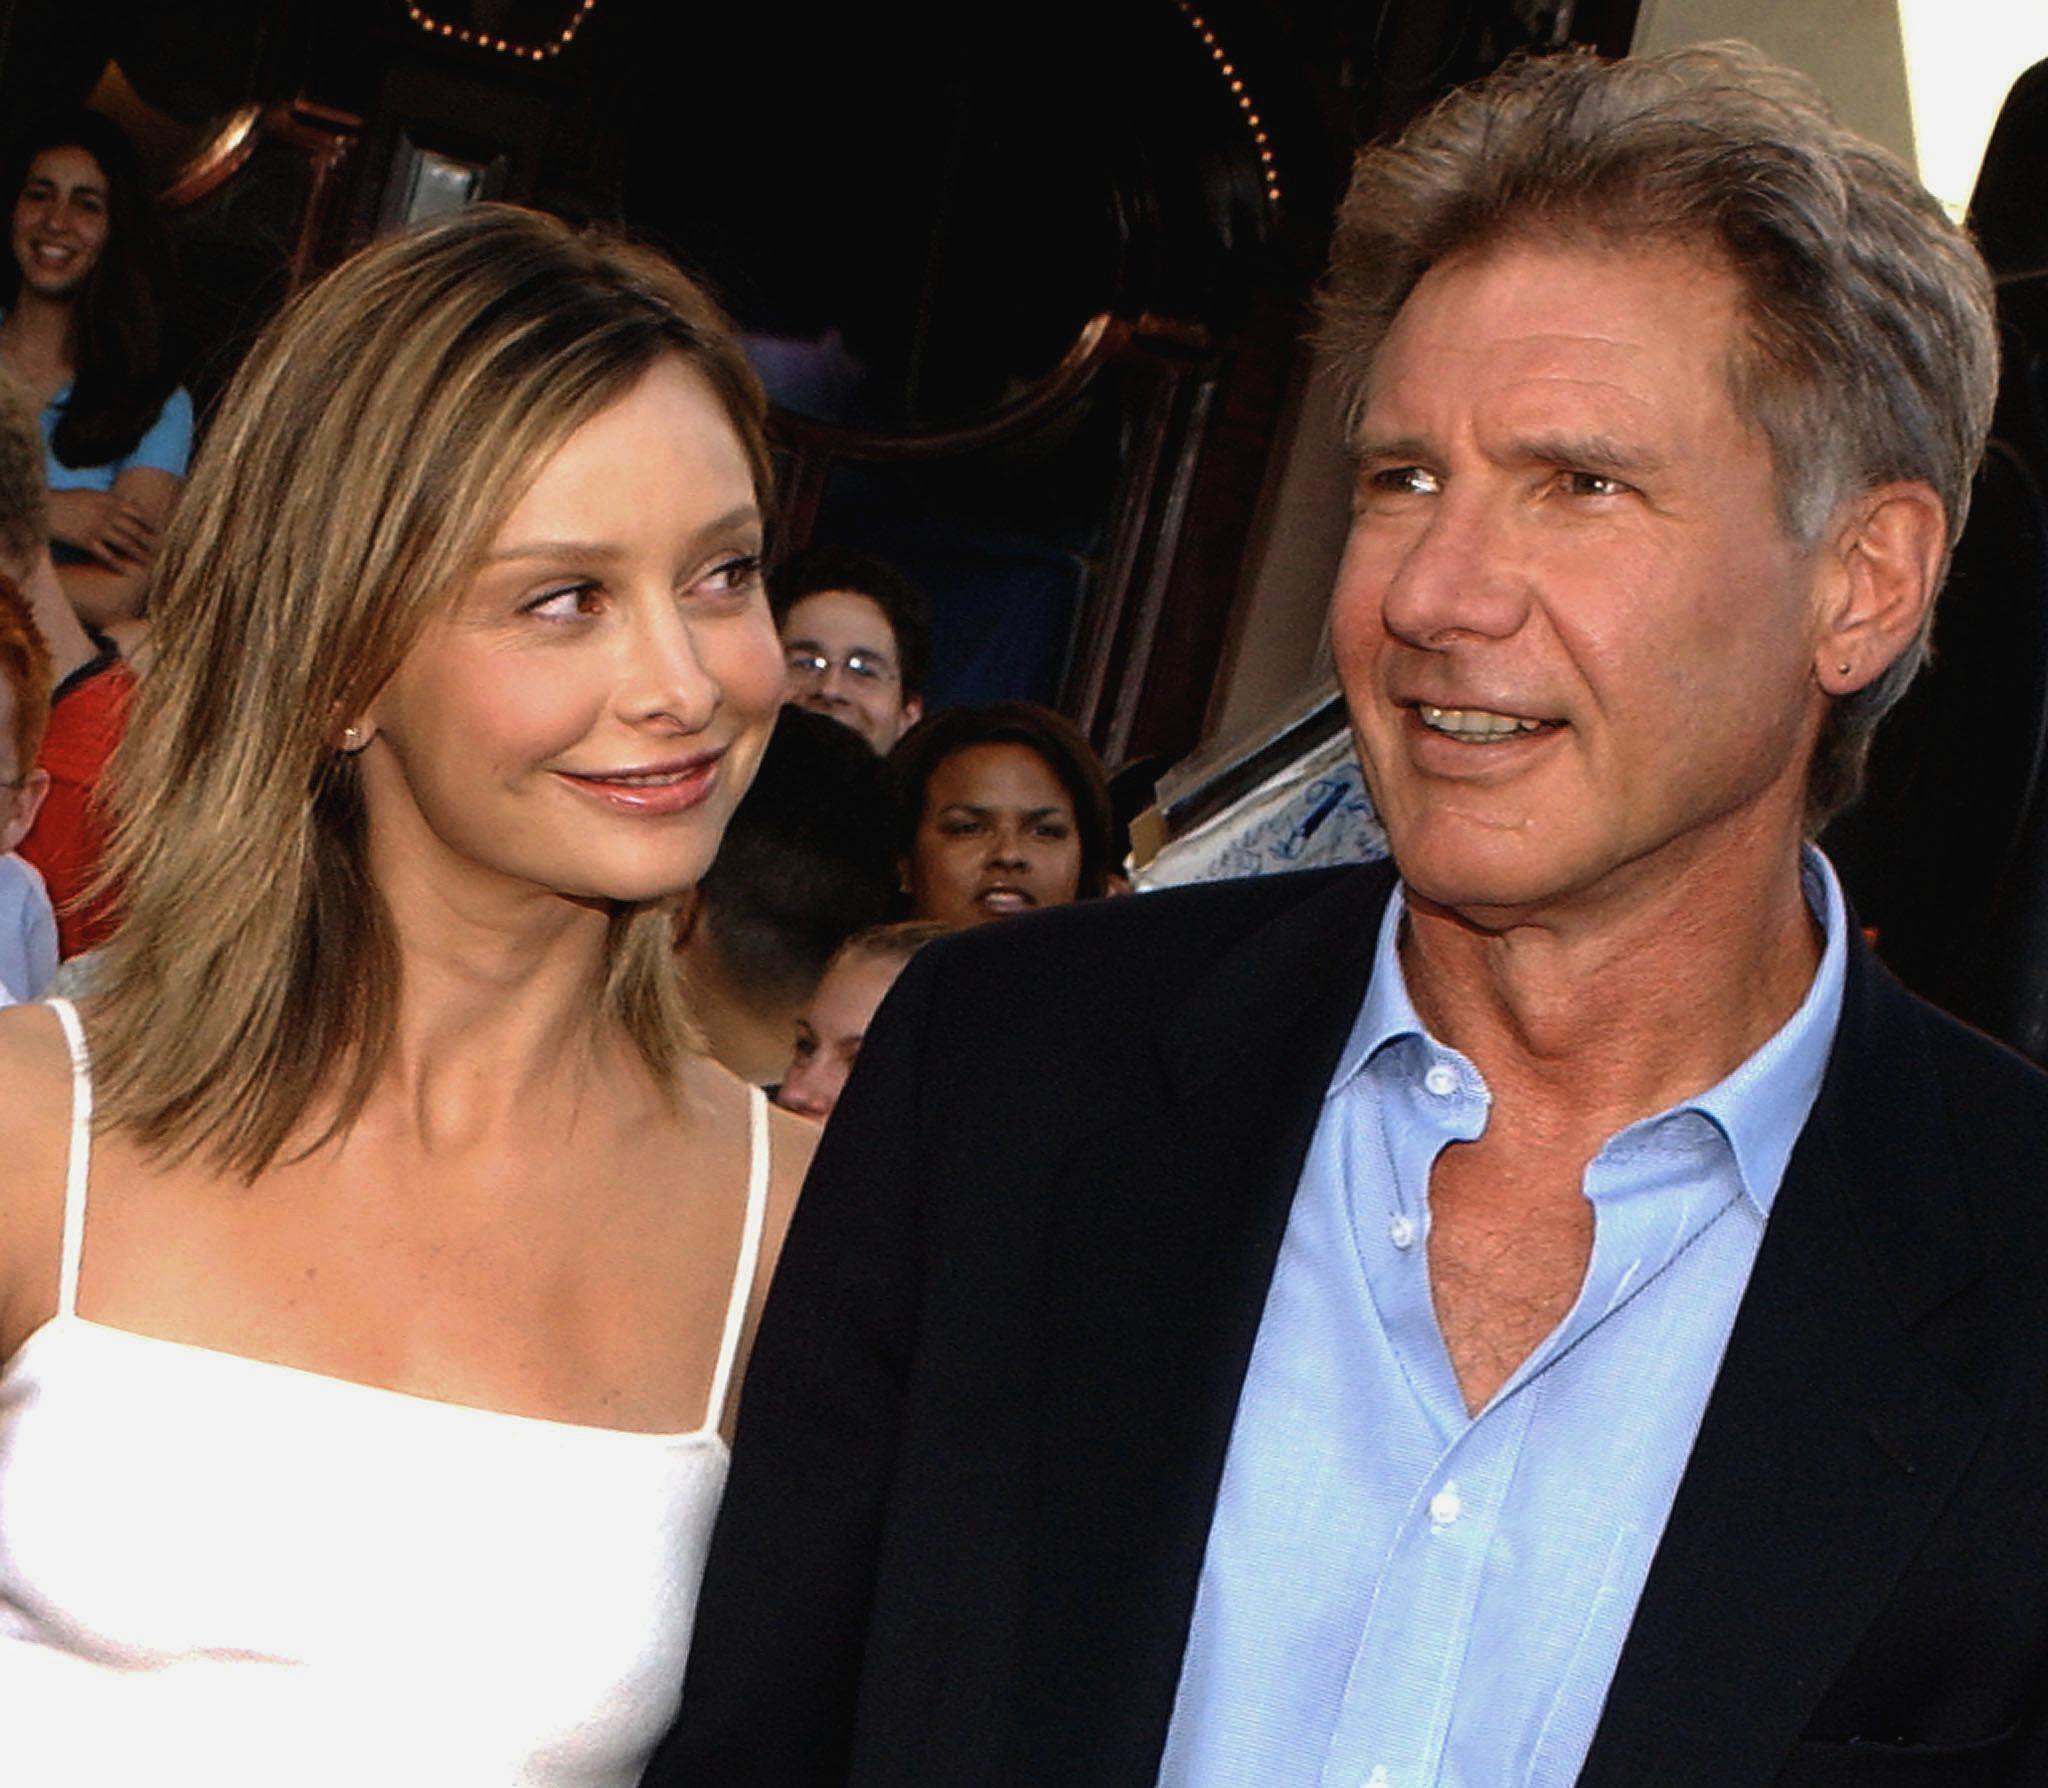 Calista Flockhart and Harrison Ford at the premiere of "K-19: The Widowmaker" in their first public appearance together, on July 15, 2002, in Los Angeles, California | Source: Getty Images